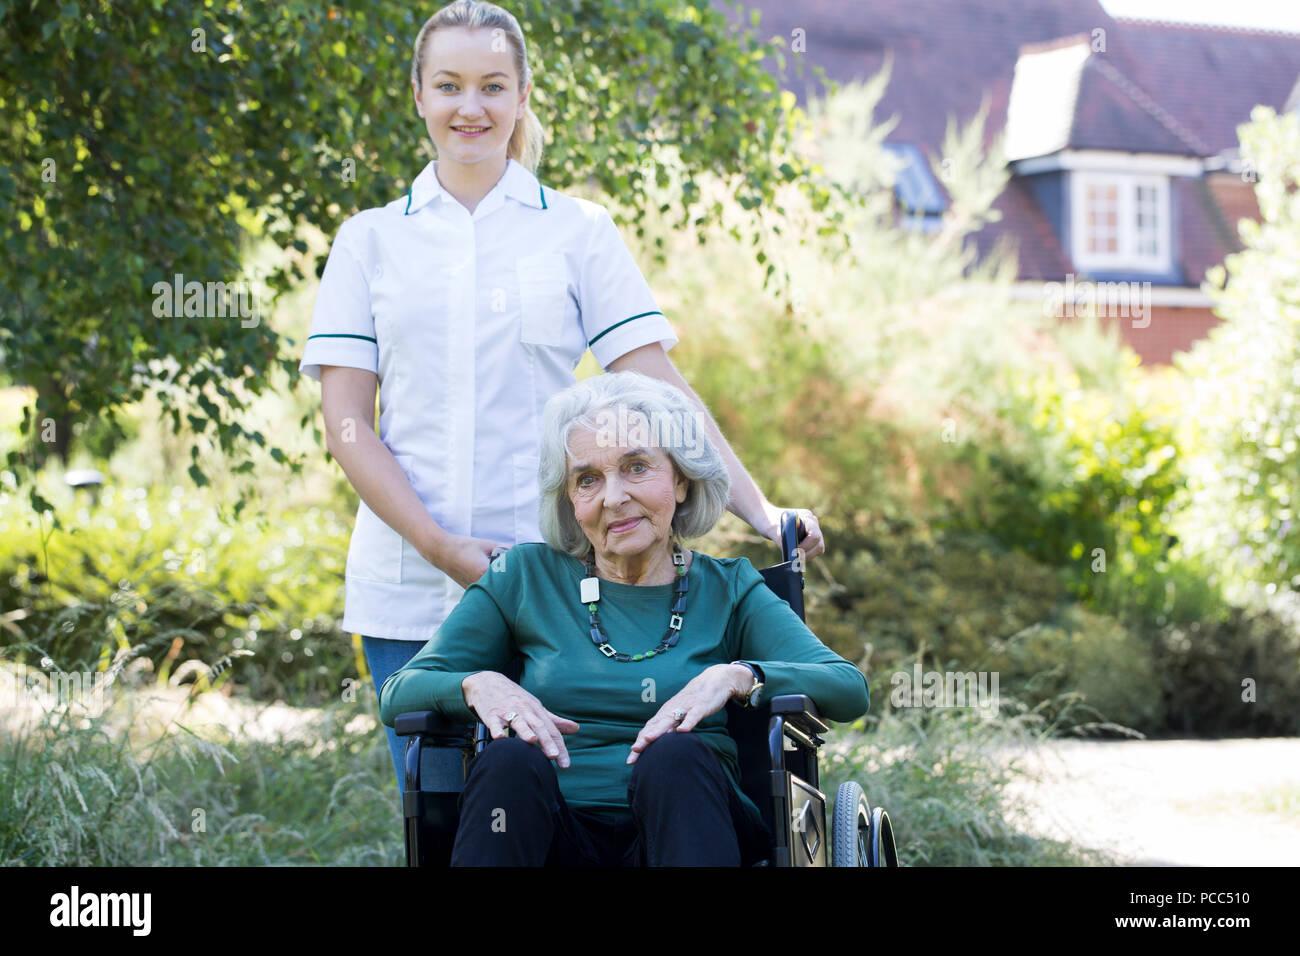 Portrait Of Carer Pushing Senior Woman In Wheelchair Outside Home Stock Photo